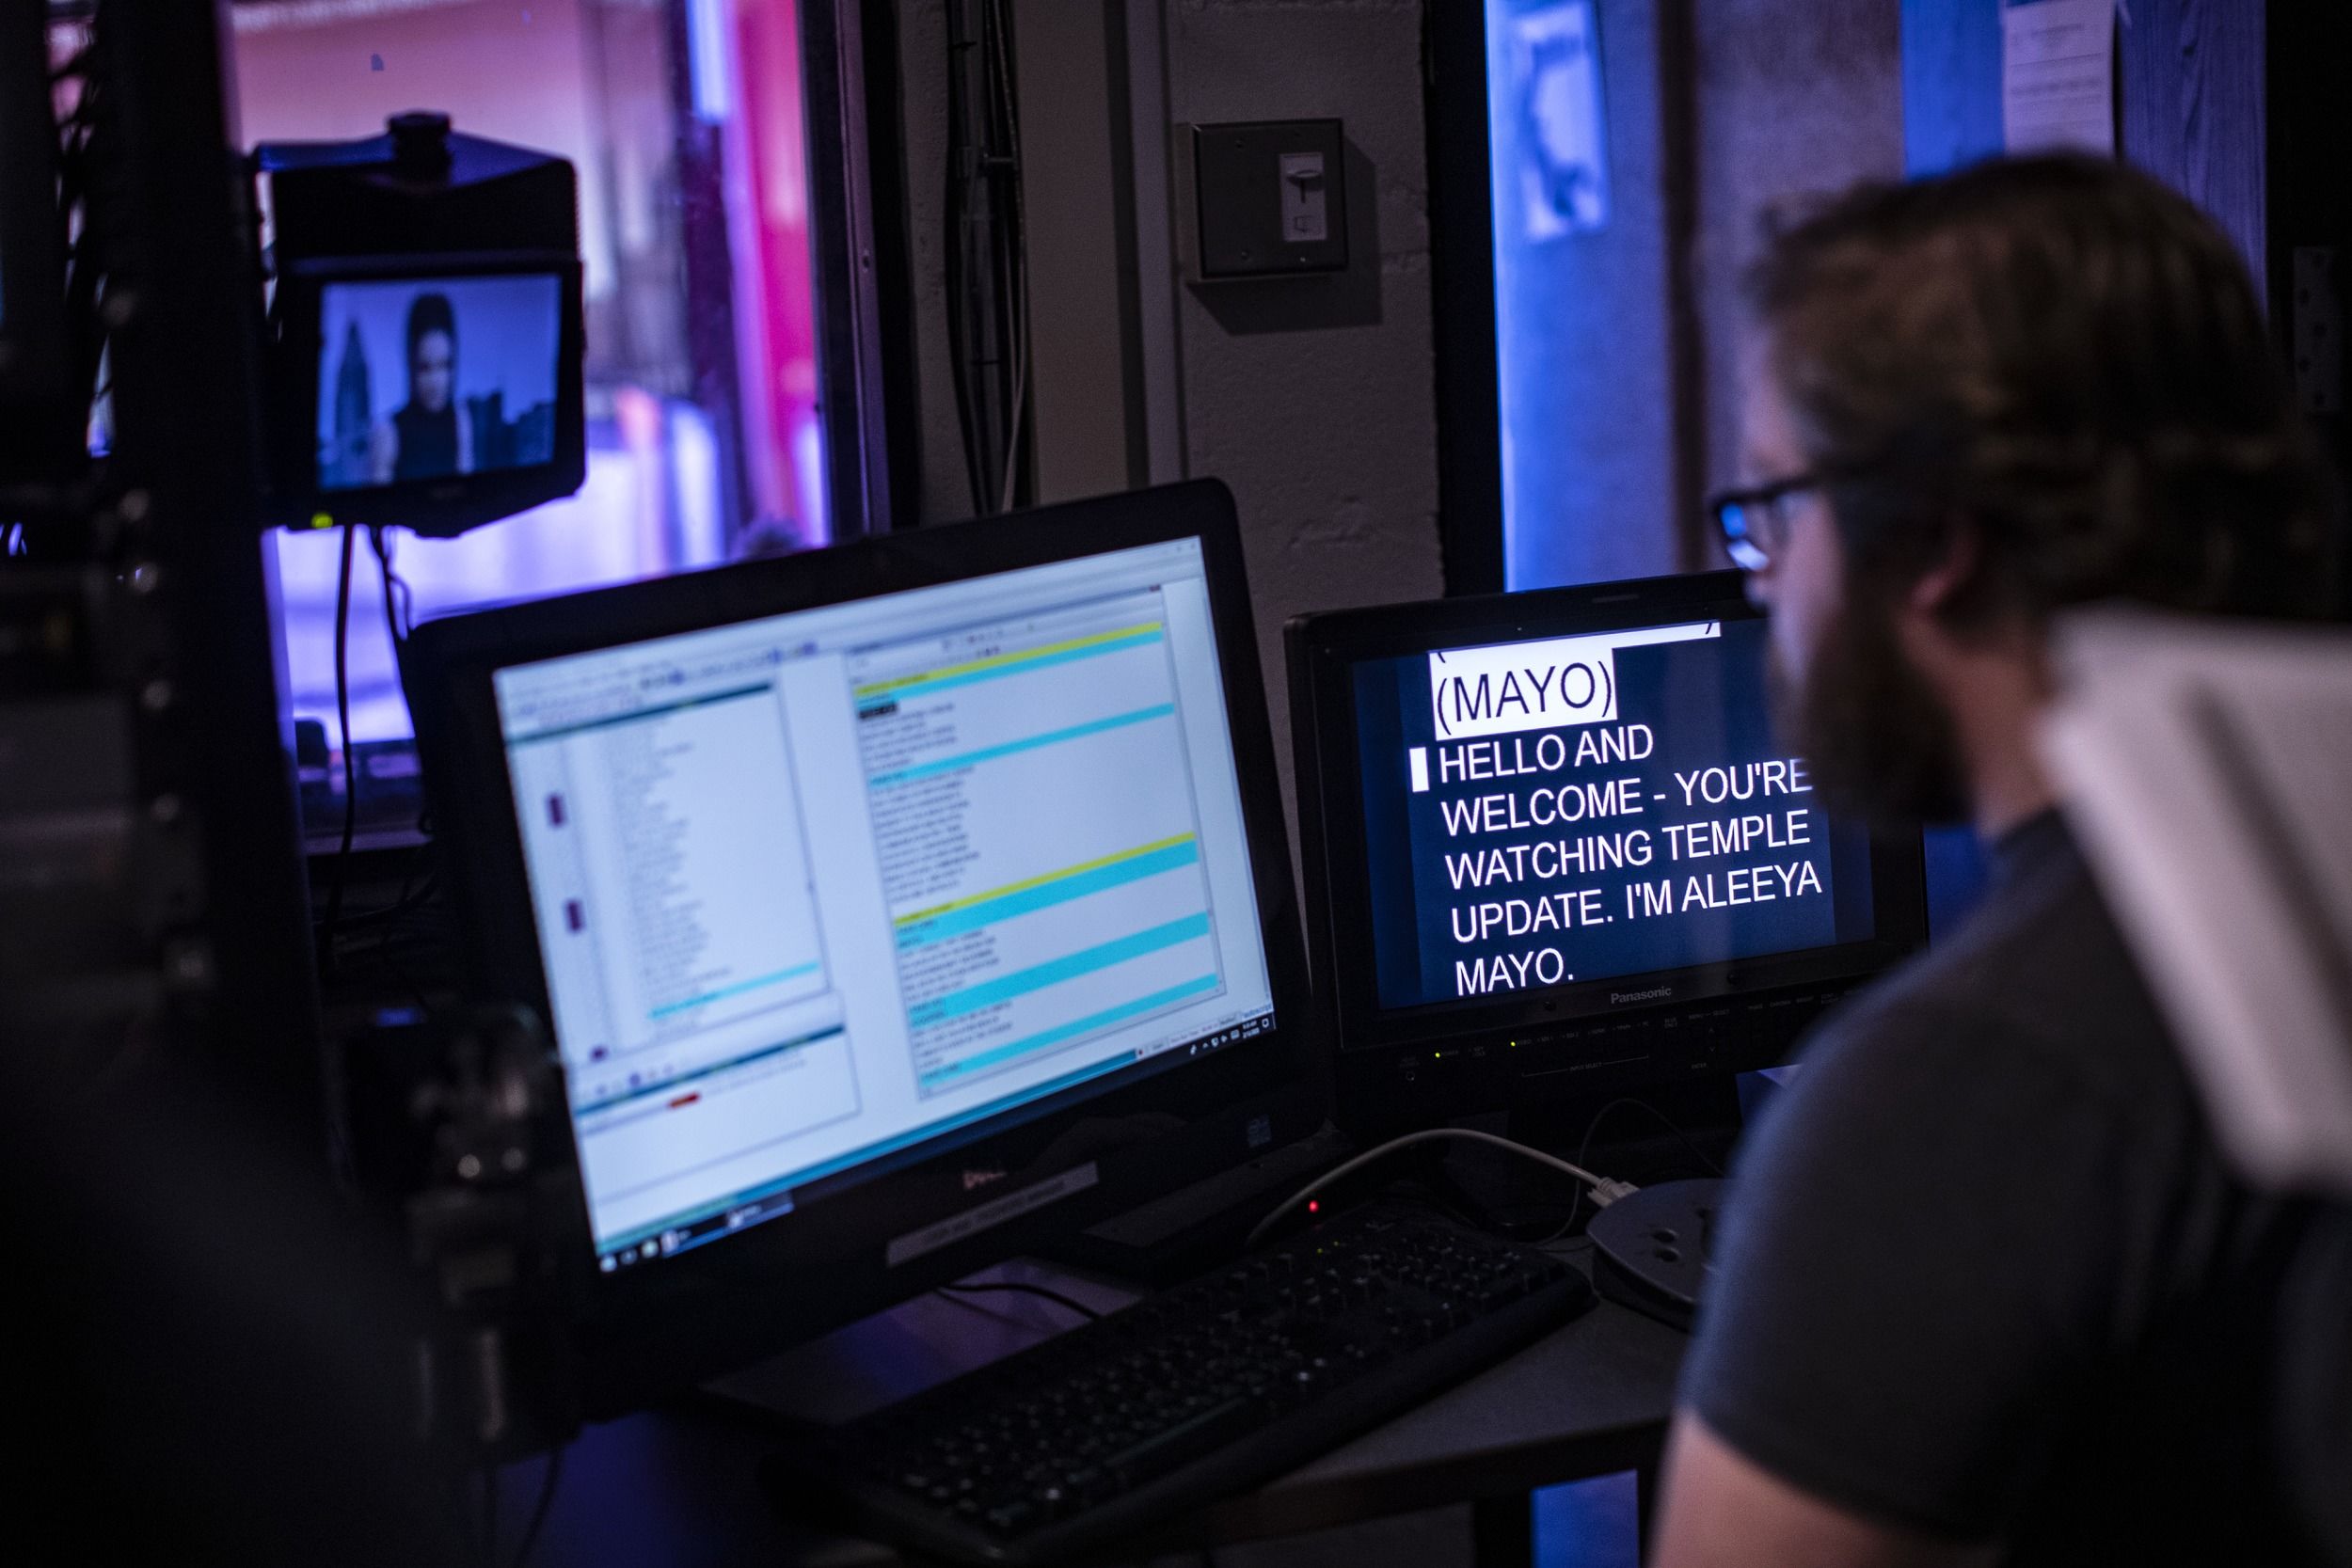 A student sits in front of two monitors in a dark broadcasting studio.